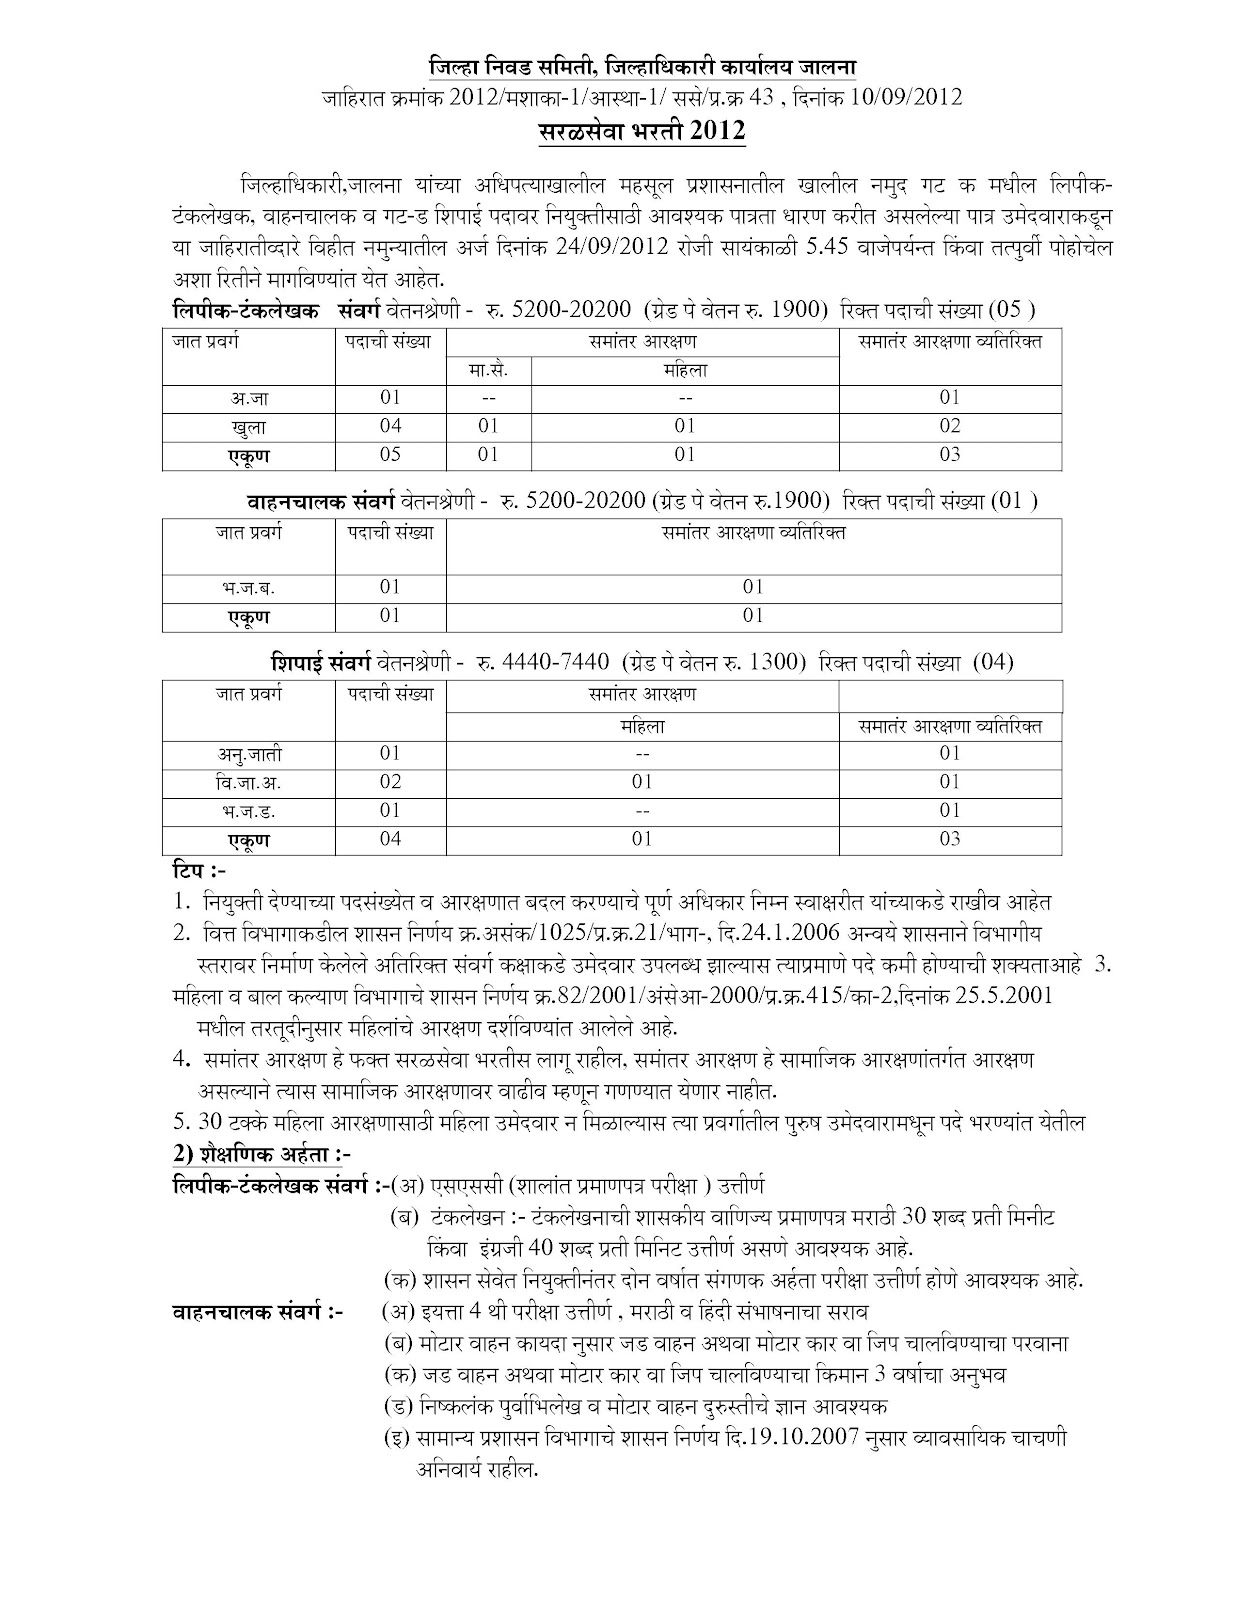 Collector Office Pune Talathi Exam Result 2012